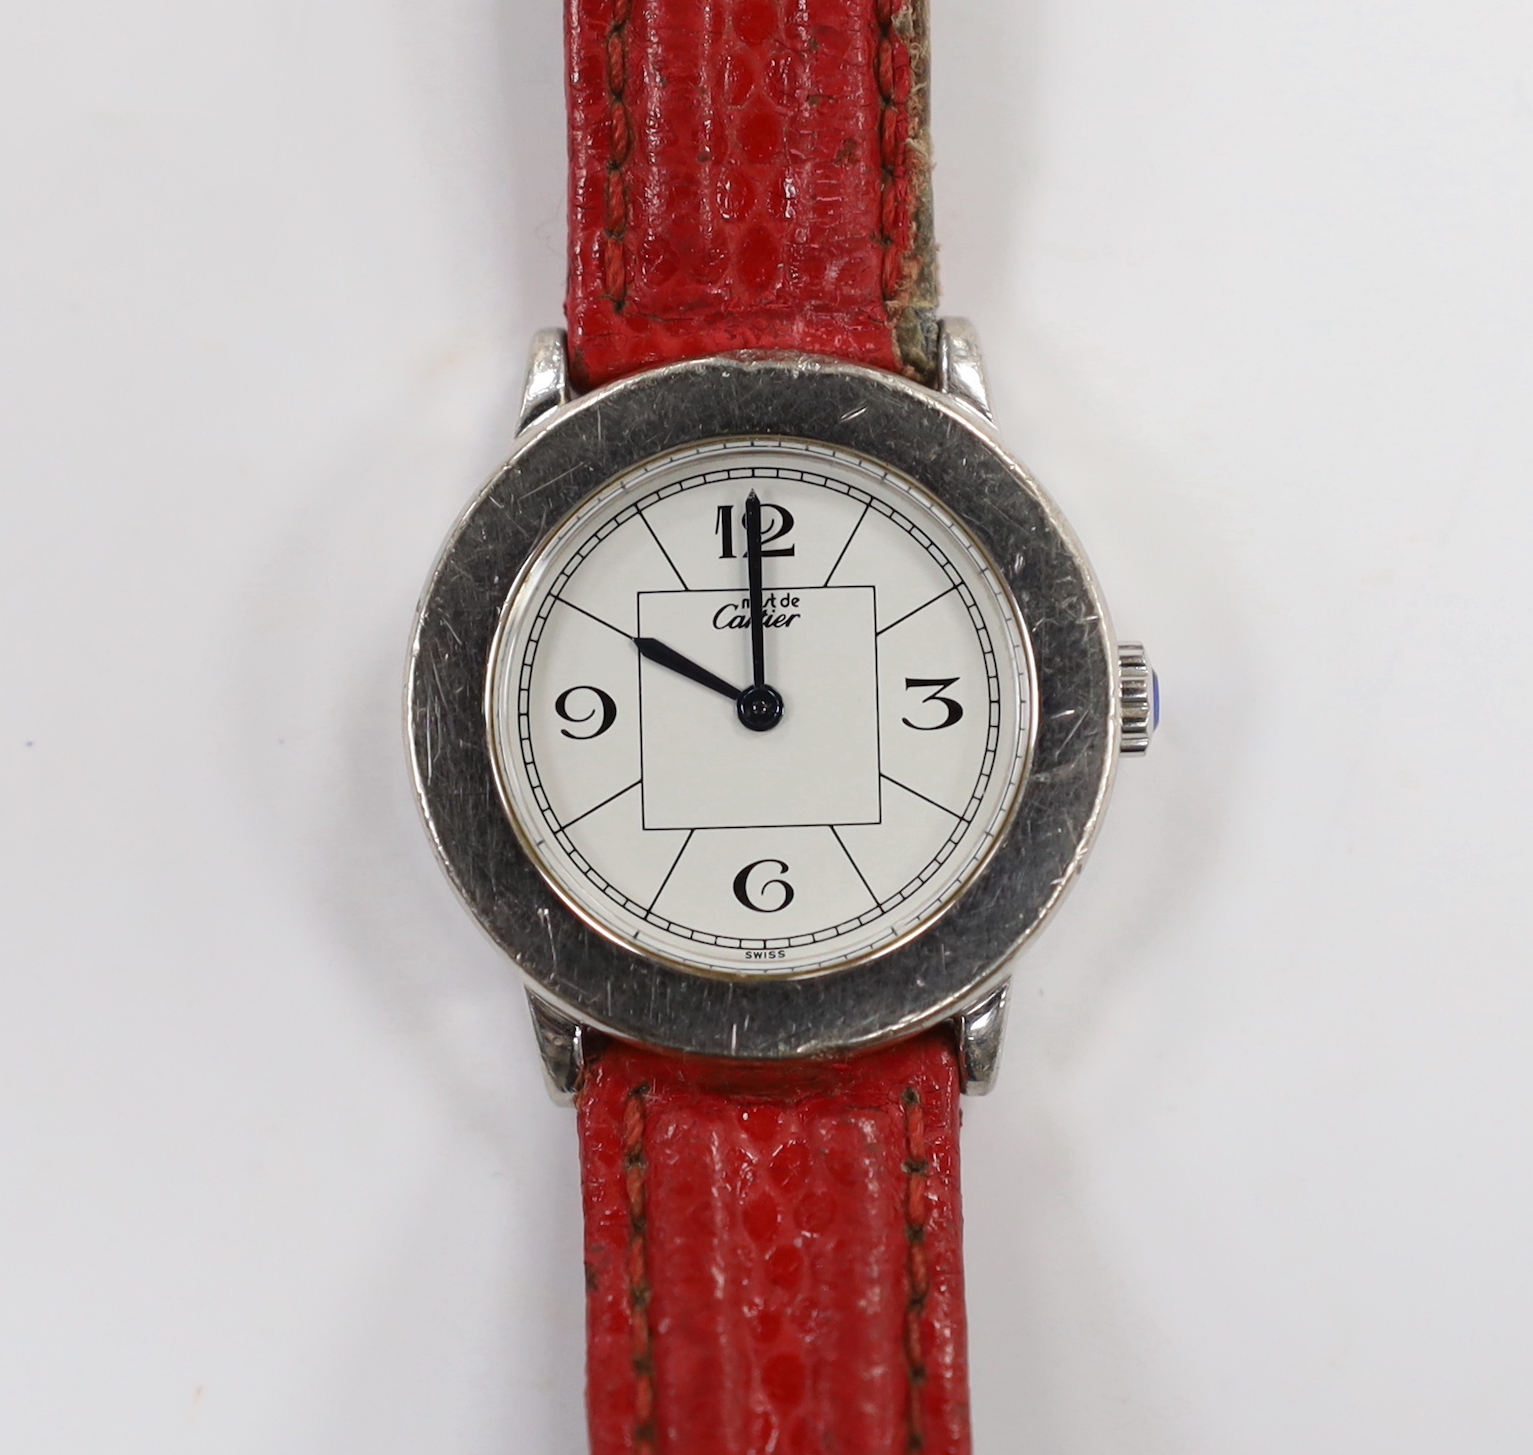 A lady's silver Must de Cartier quartz wrist watch, ref.1806, on a red leather strap, no box or papers, case diameter 27mm.